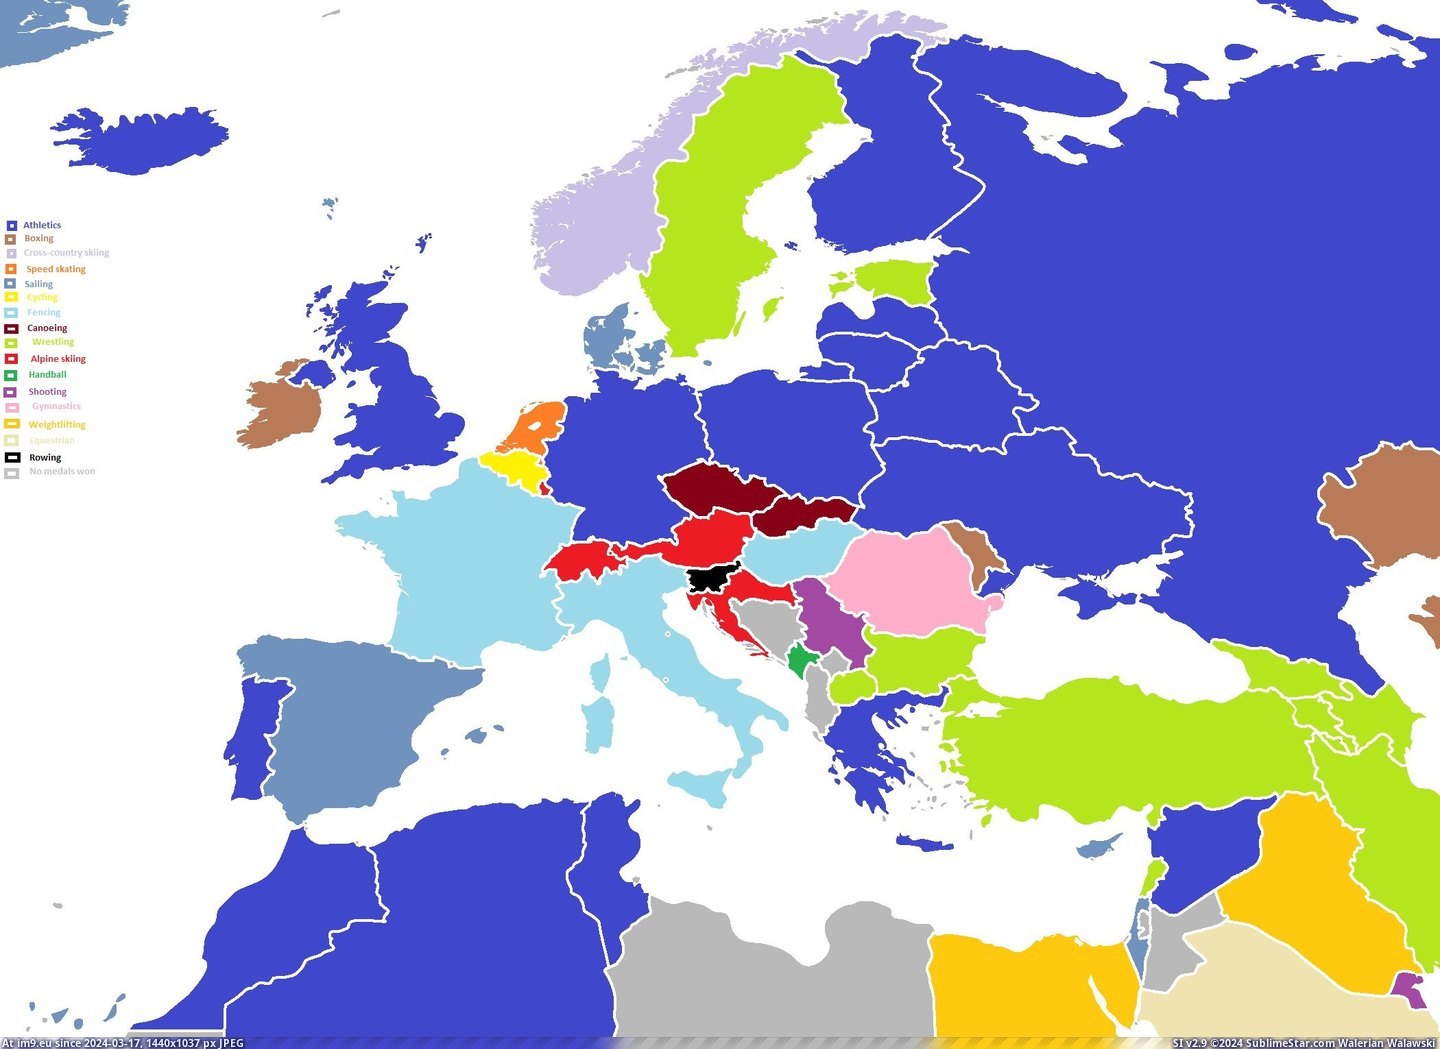 #Europe #Won #Area #Medals #2100x1525 #Olympic #Sport #Surrounding [Mapporn] Most Olympic medals won by sport - Europe and the surrounding area [2100x1525] [OC] Pic. (Bild von album My r/MAPS favs))